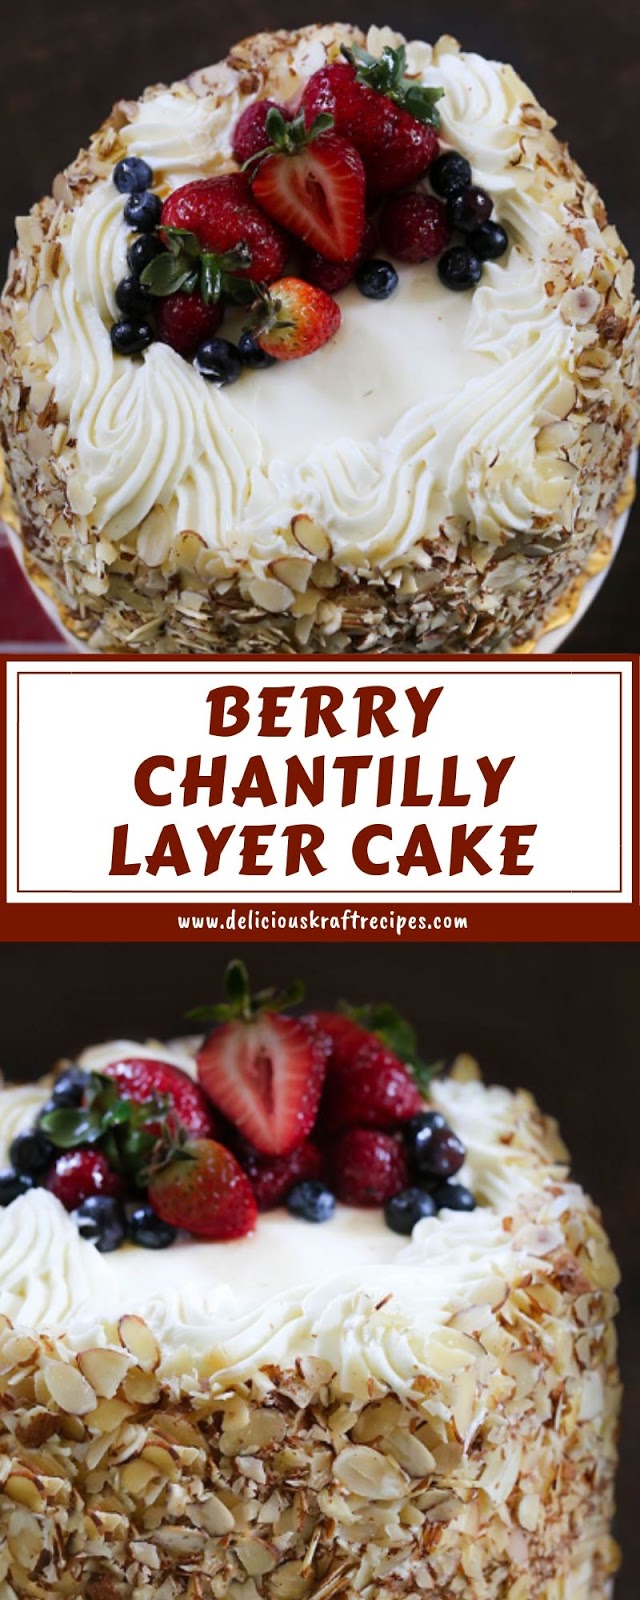 BERRY CHANTILLY LAYER CAKE